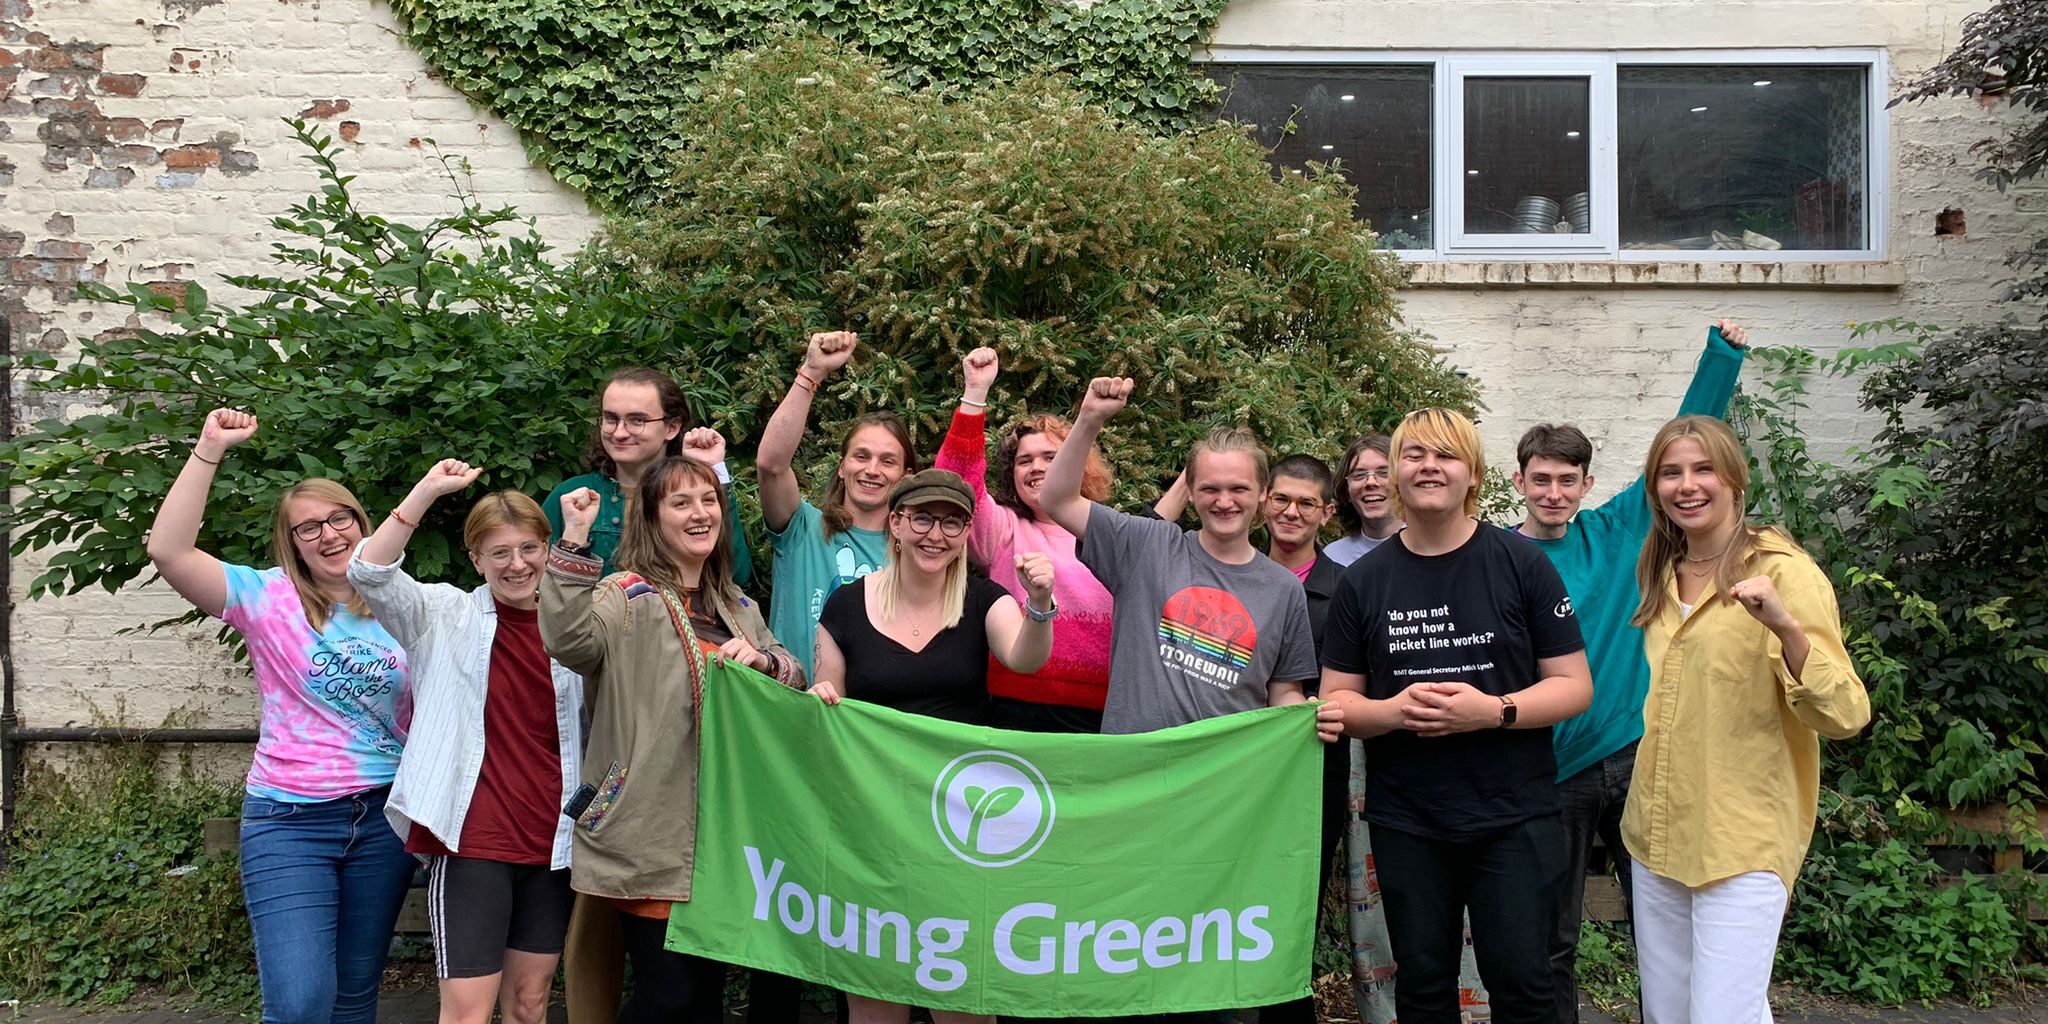 The Young Greens Executive Committee stood with the Young Greens banner and their fists raised.